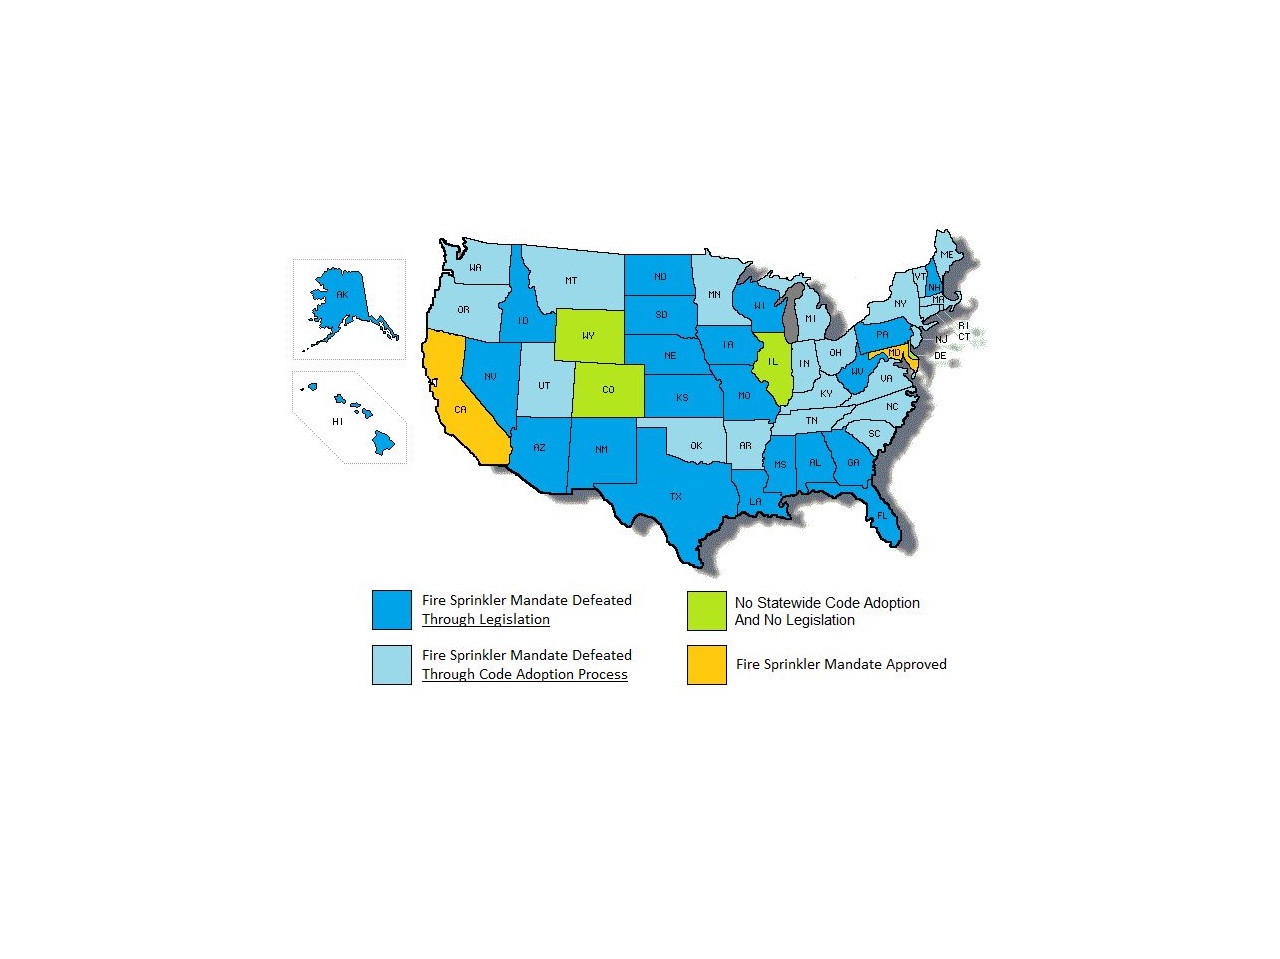 Adoption of fire sprinkler mandates state by state